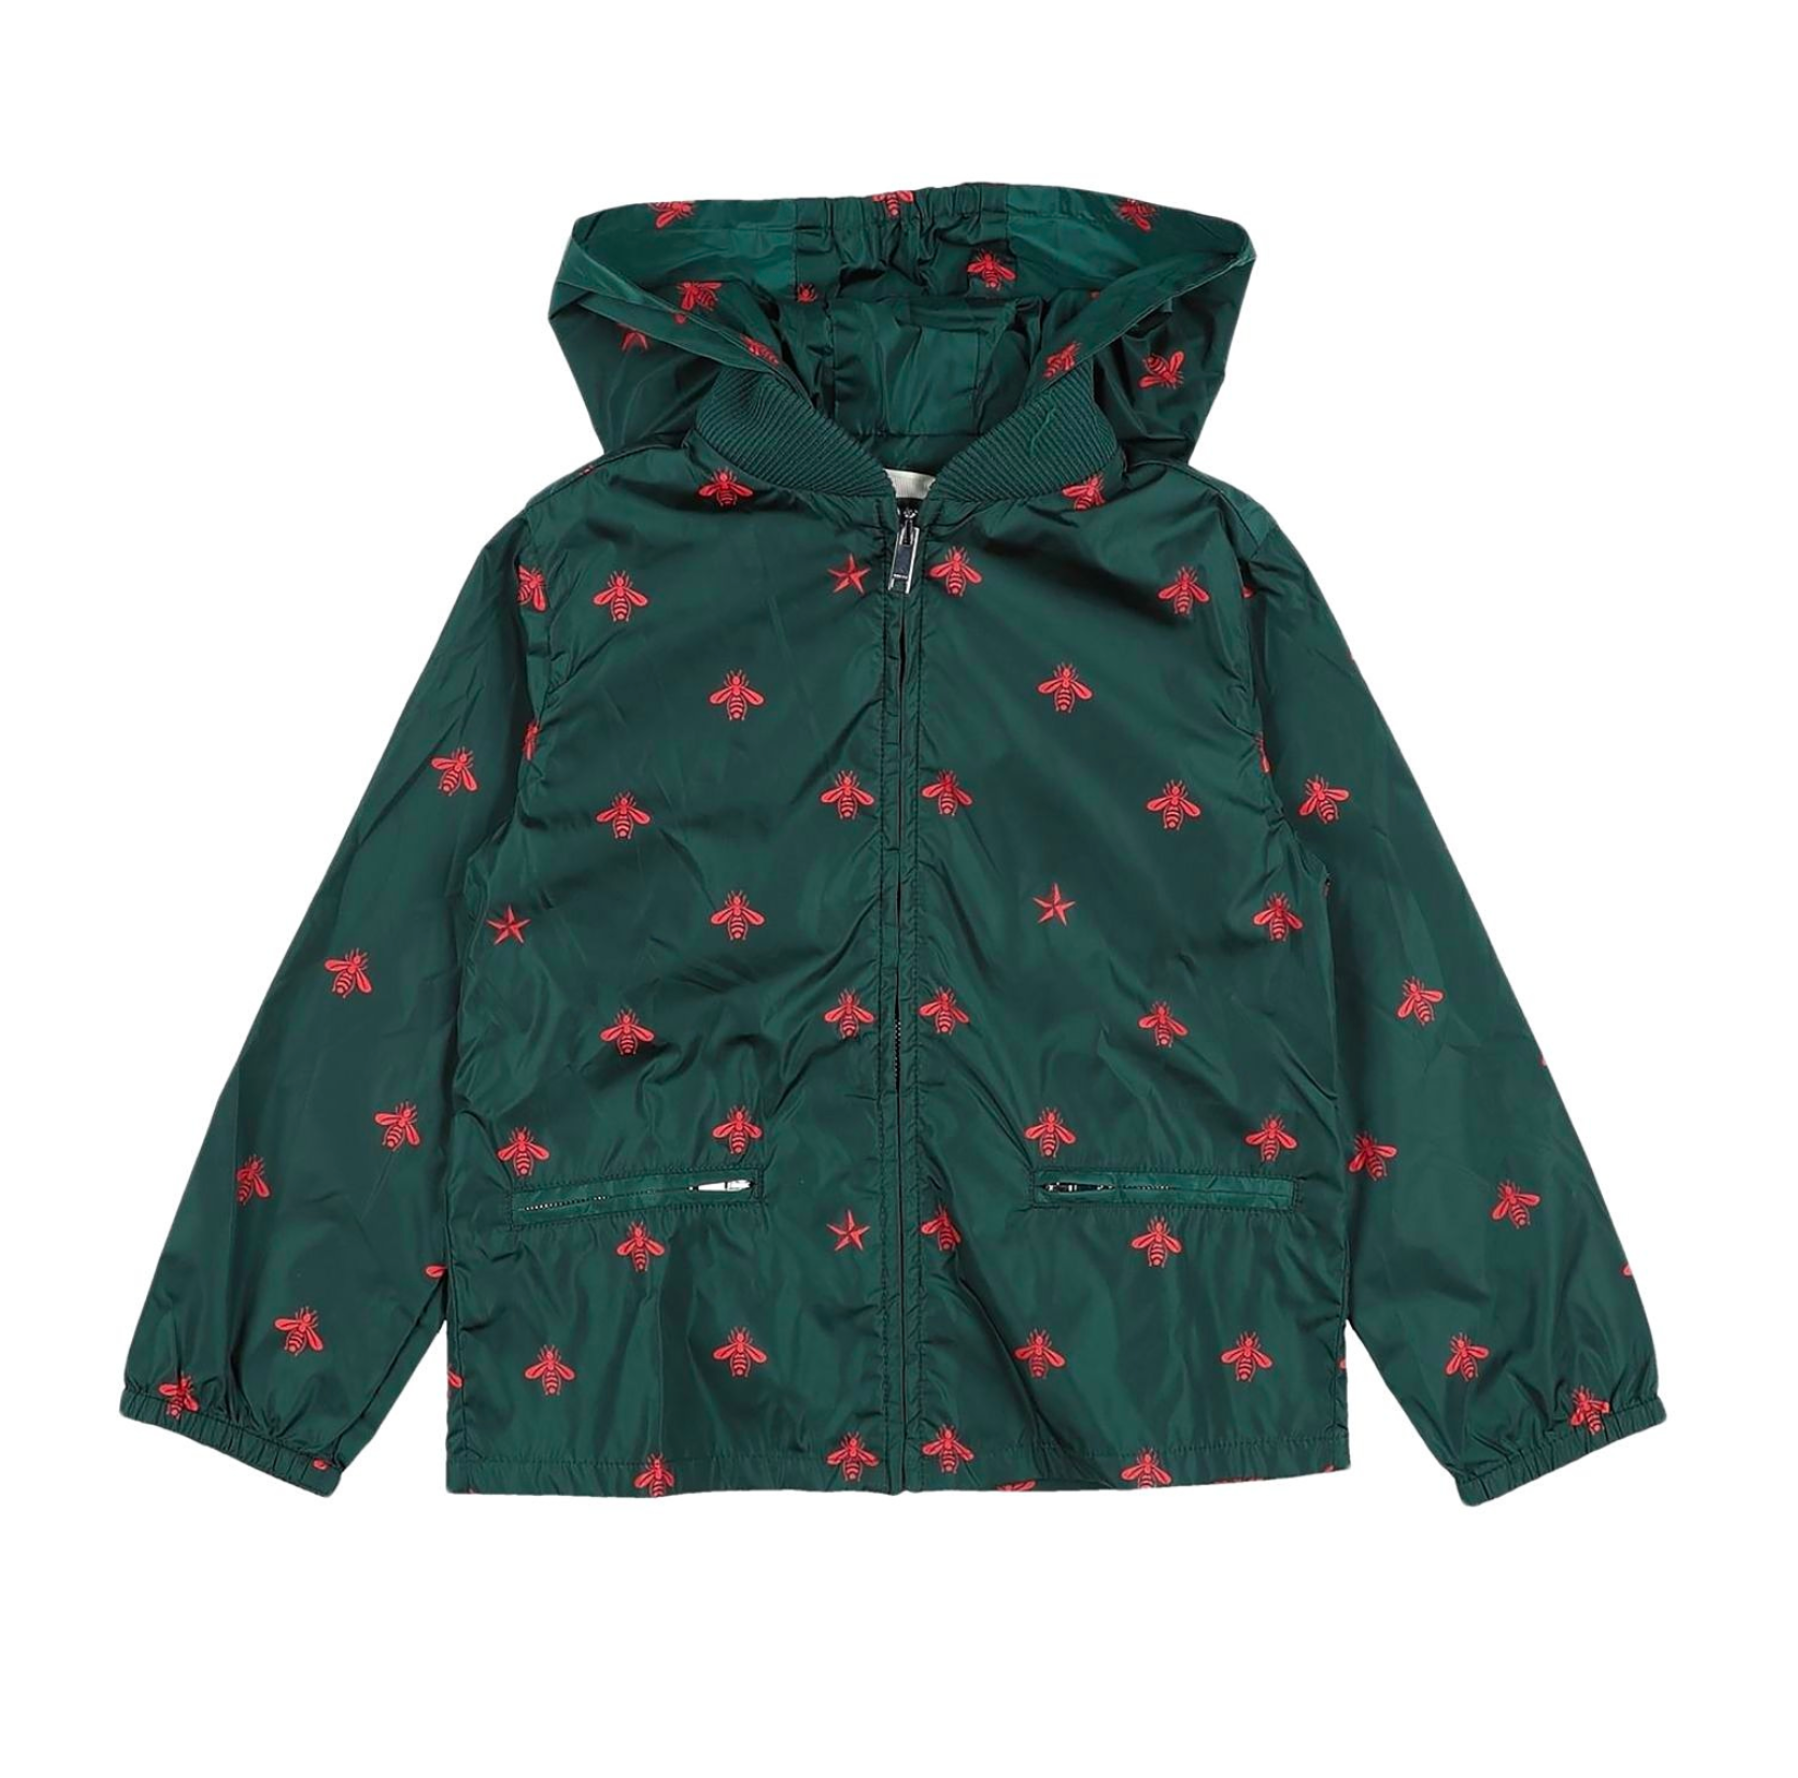 GUCCI - Light green jacket with red bees - 6 years old